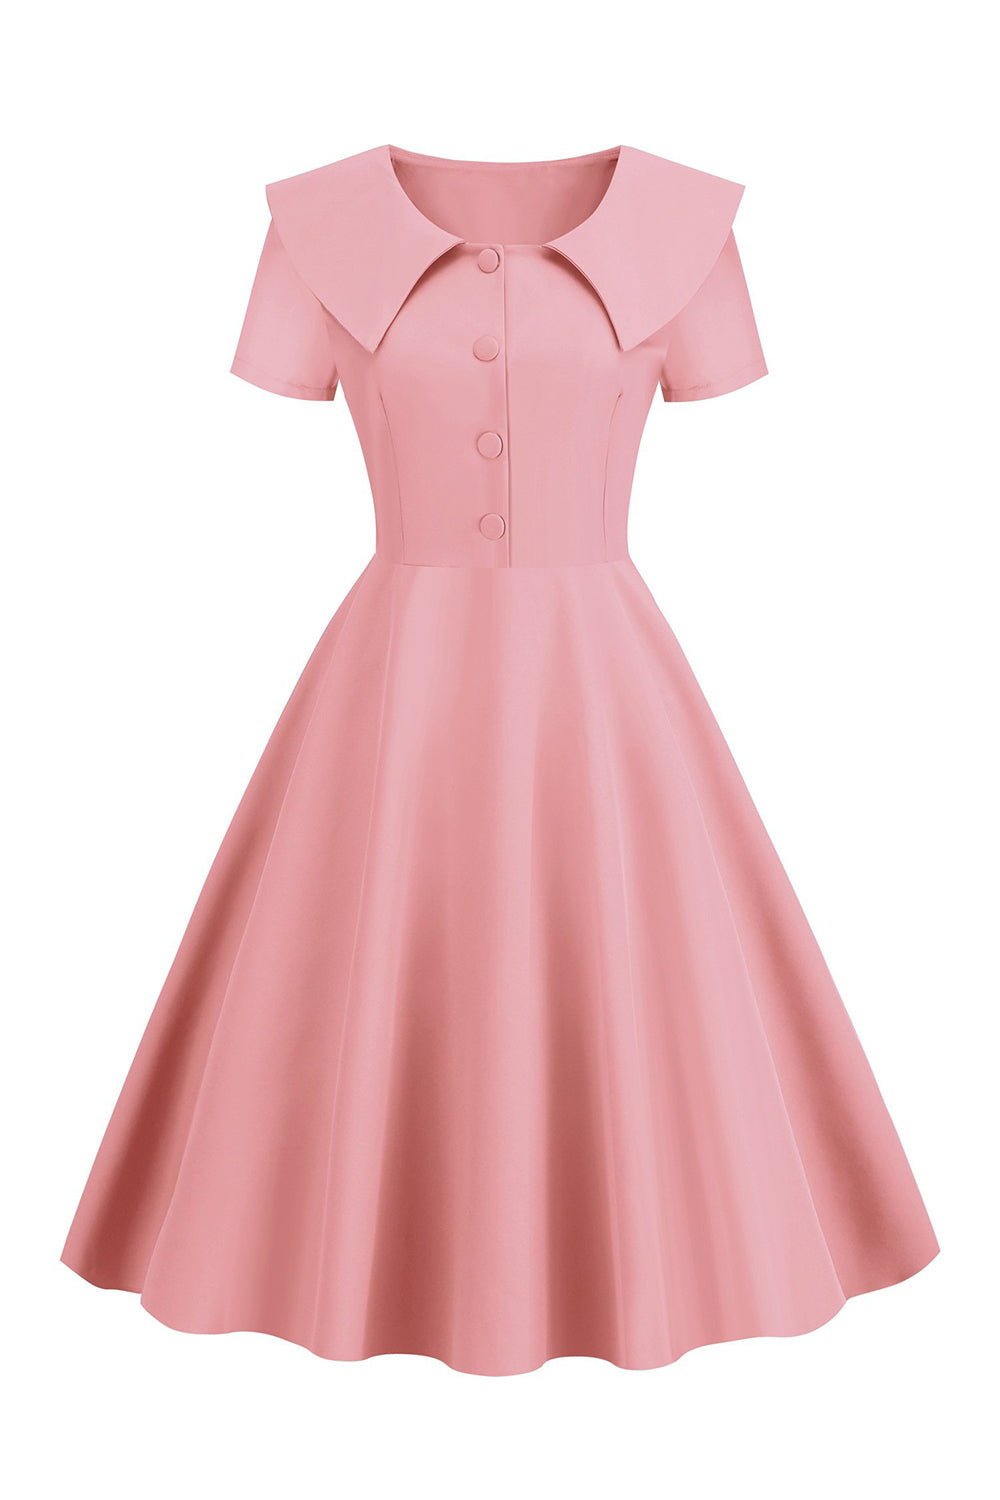 Blush Short Sleeves Peter Pan Vintage Dress With Buttons